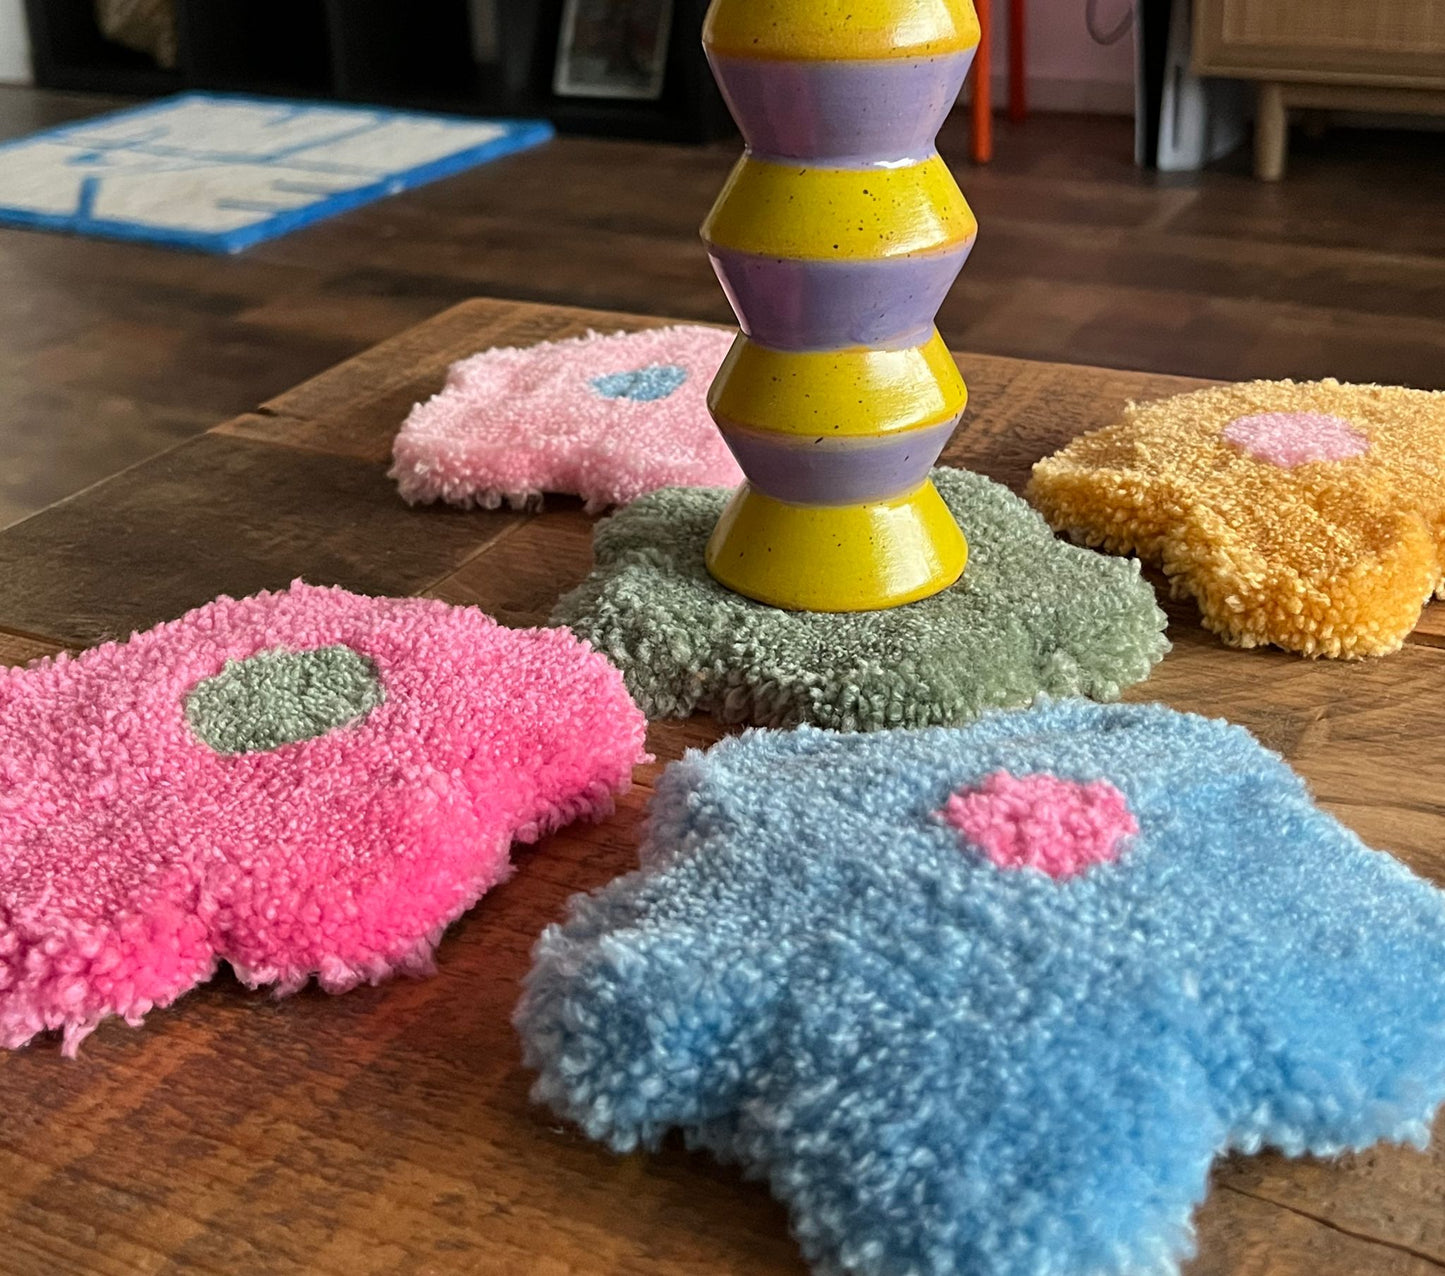 Our tufted flower shaped coasters placed on a table in various color combinations, such as green and blue, pink and green, yellow and pink, pink and blue, blue and pink. A yellow and lila candle holder is placed on one of the coastersMade by The Woollers